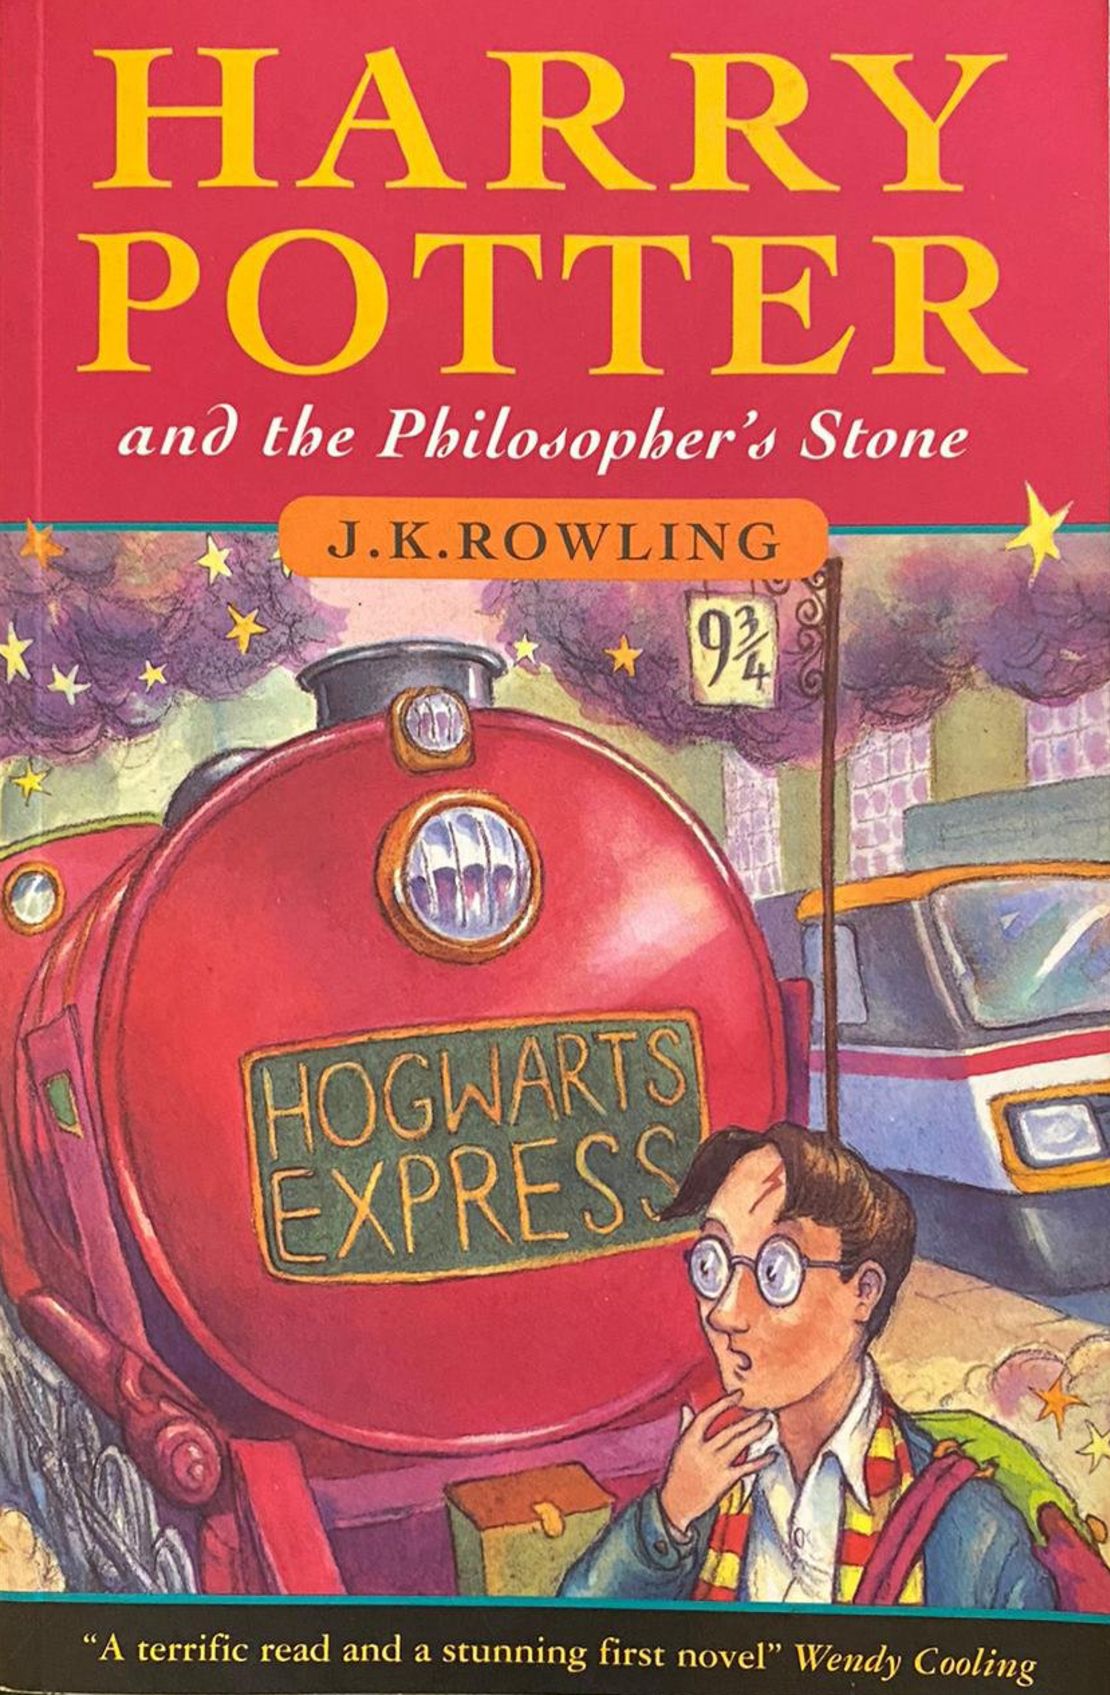 The first edition of 1997 book "Harry Potter and the Philosopher's Stone" -- which Taylor illustrated.